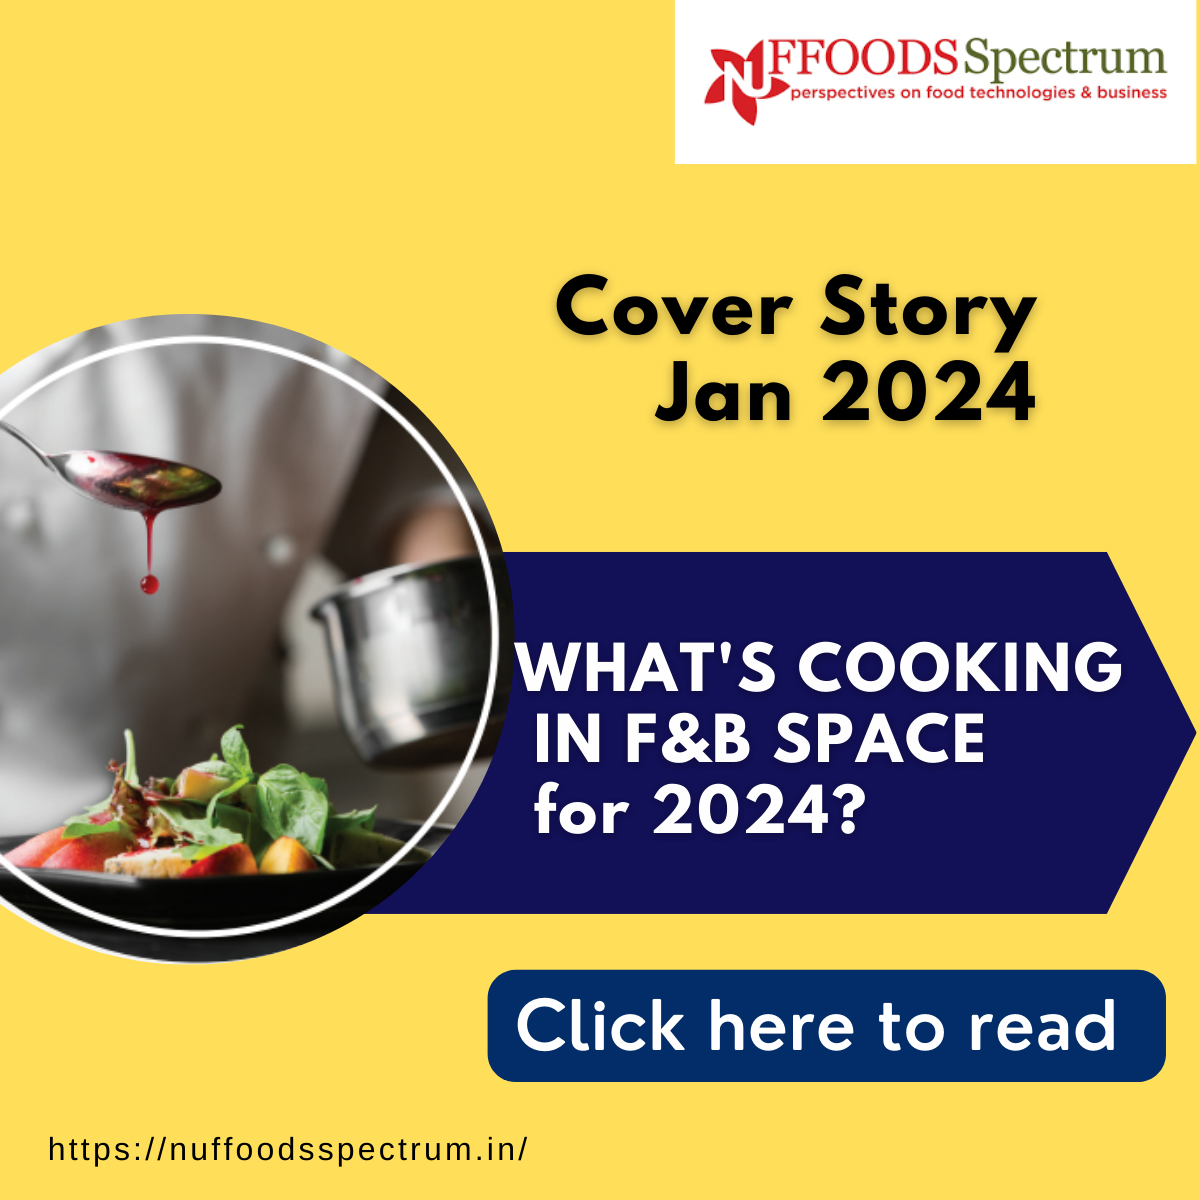  WHAT’S COOKING  IN F&B SPACE for 2024? 